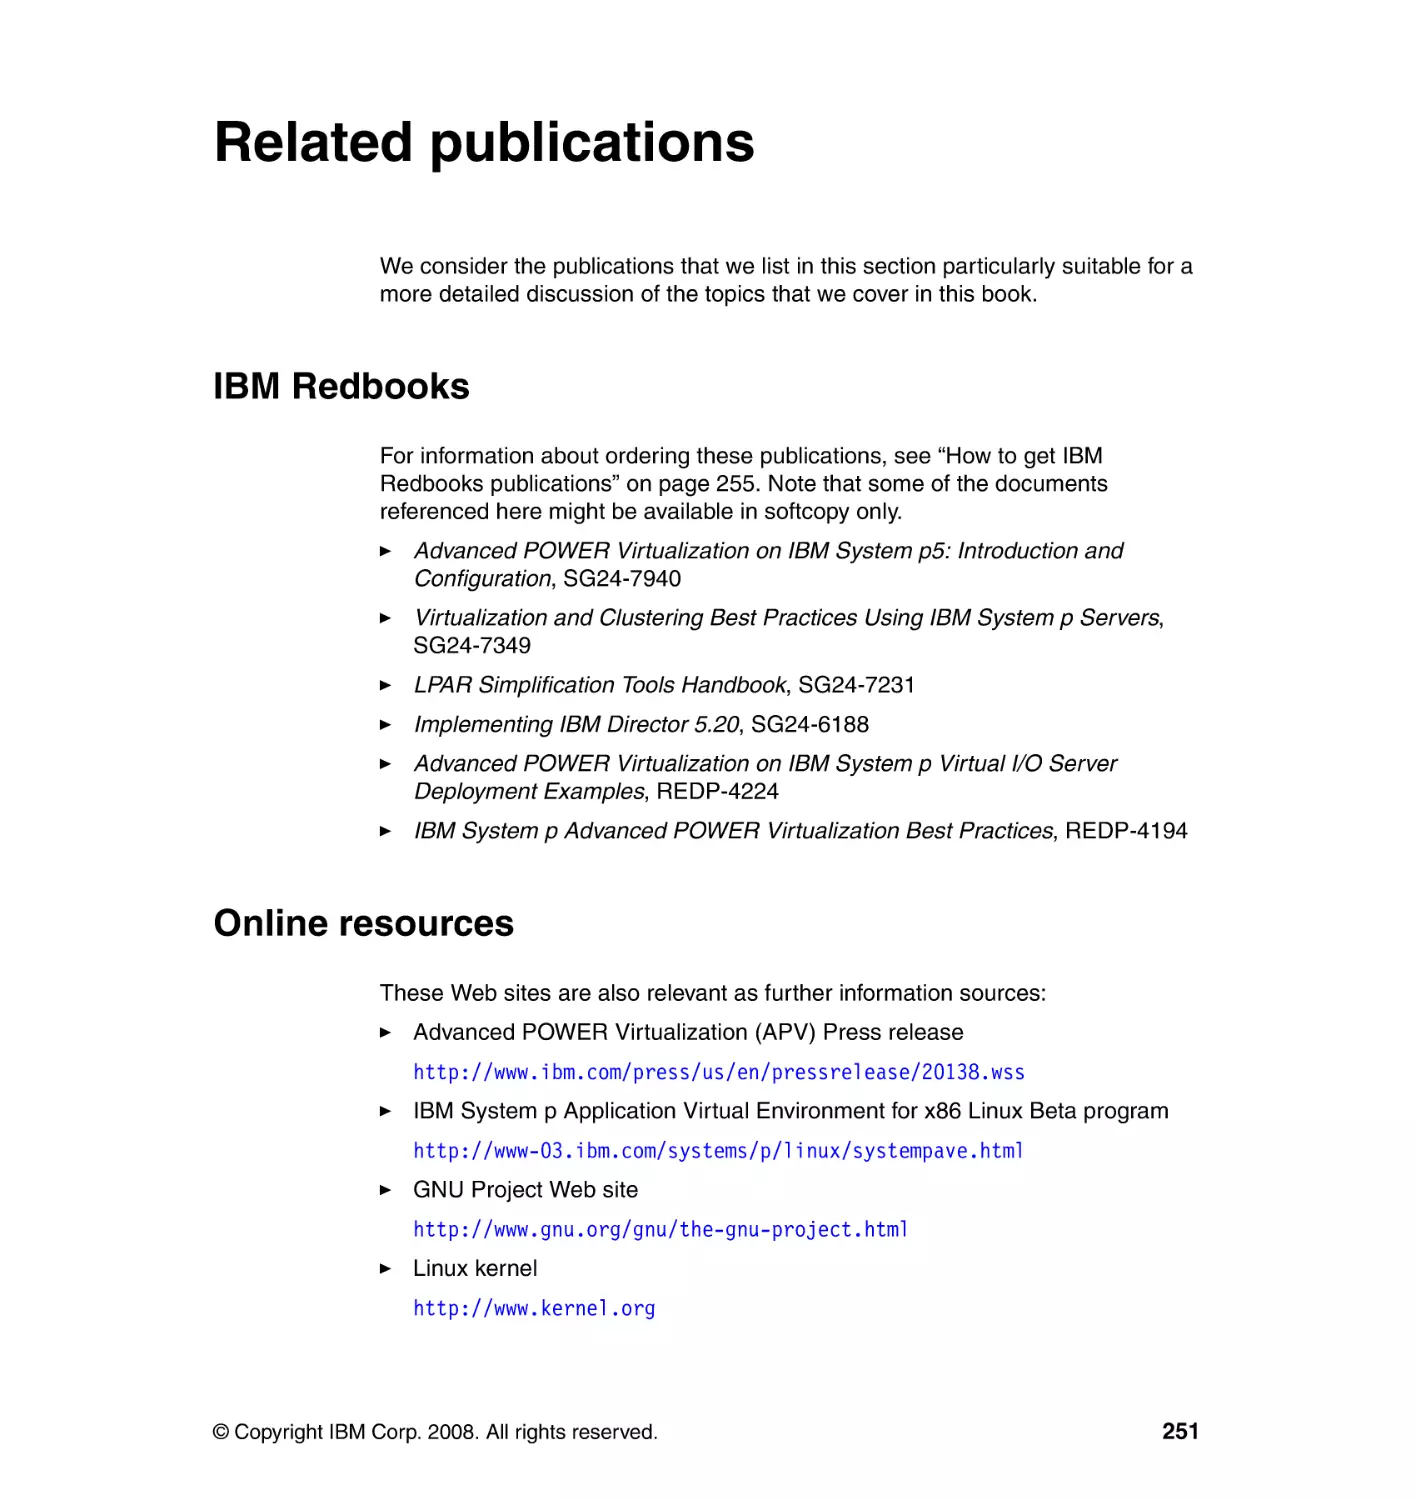 Related publications
IBM Redbooks
Online resources